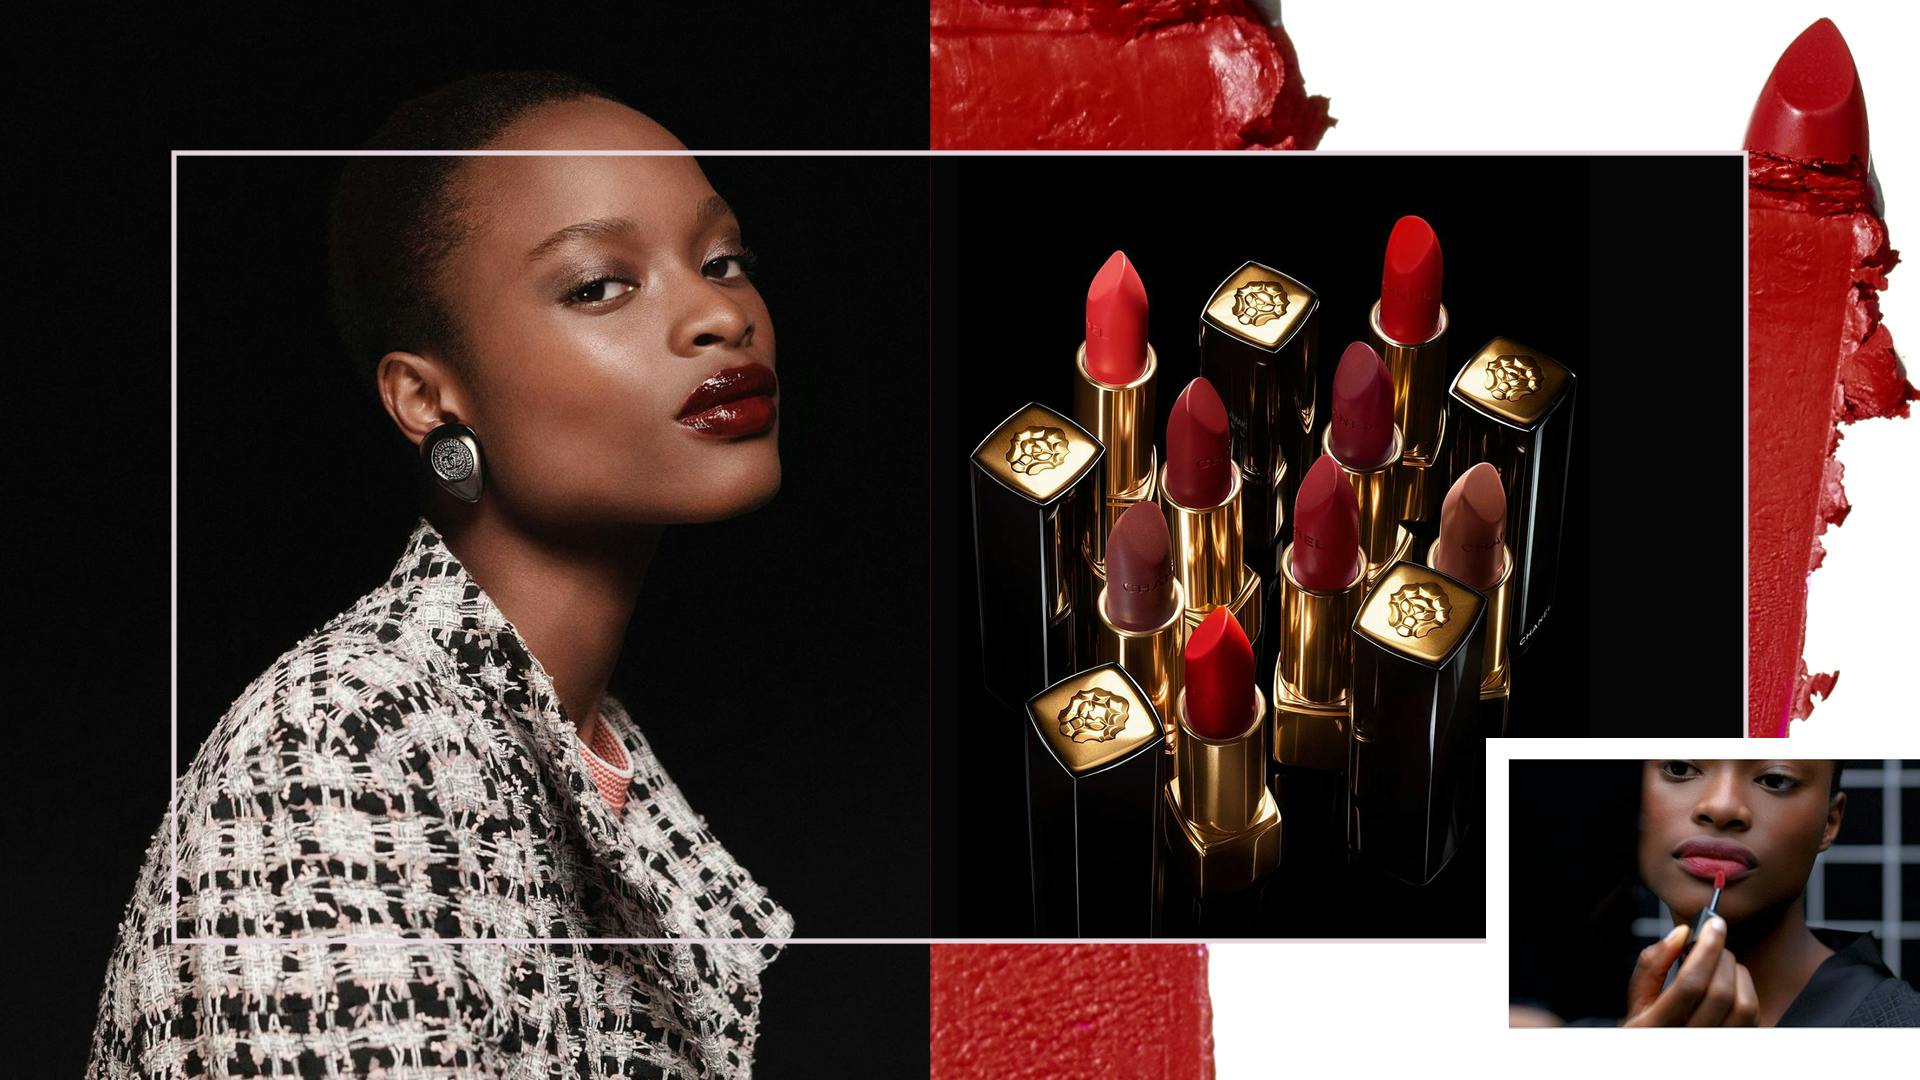 The new LIPSCANNER App Find your perfect shade  CHANEL